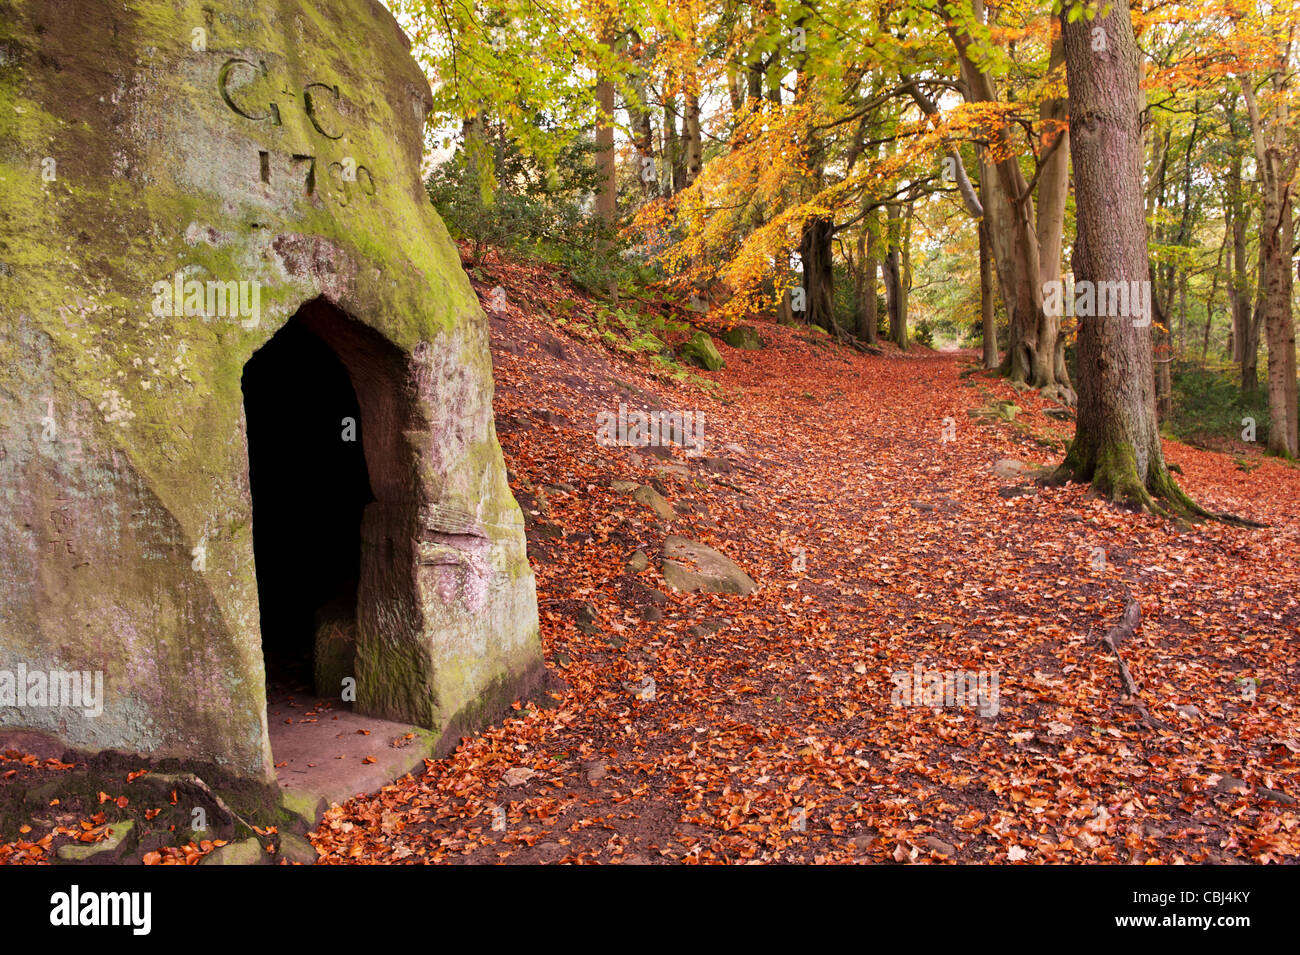 Autumn in Great woods Sneaton forest North Yorkshire. Stock Photo